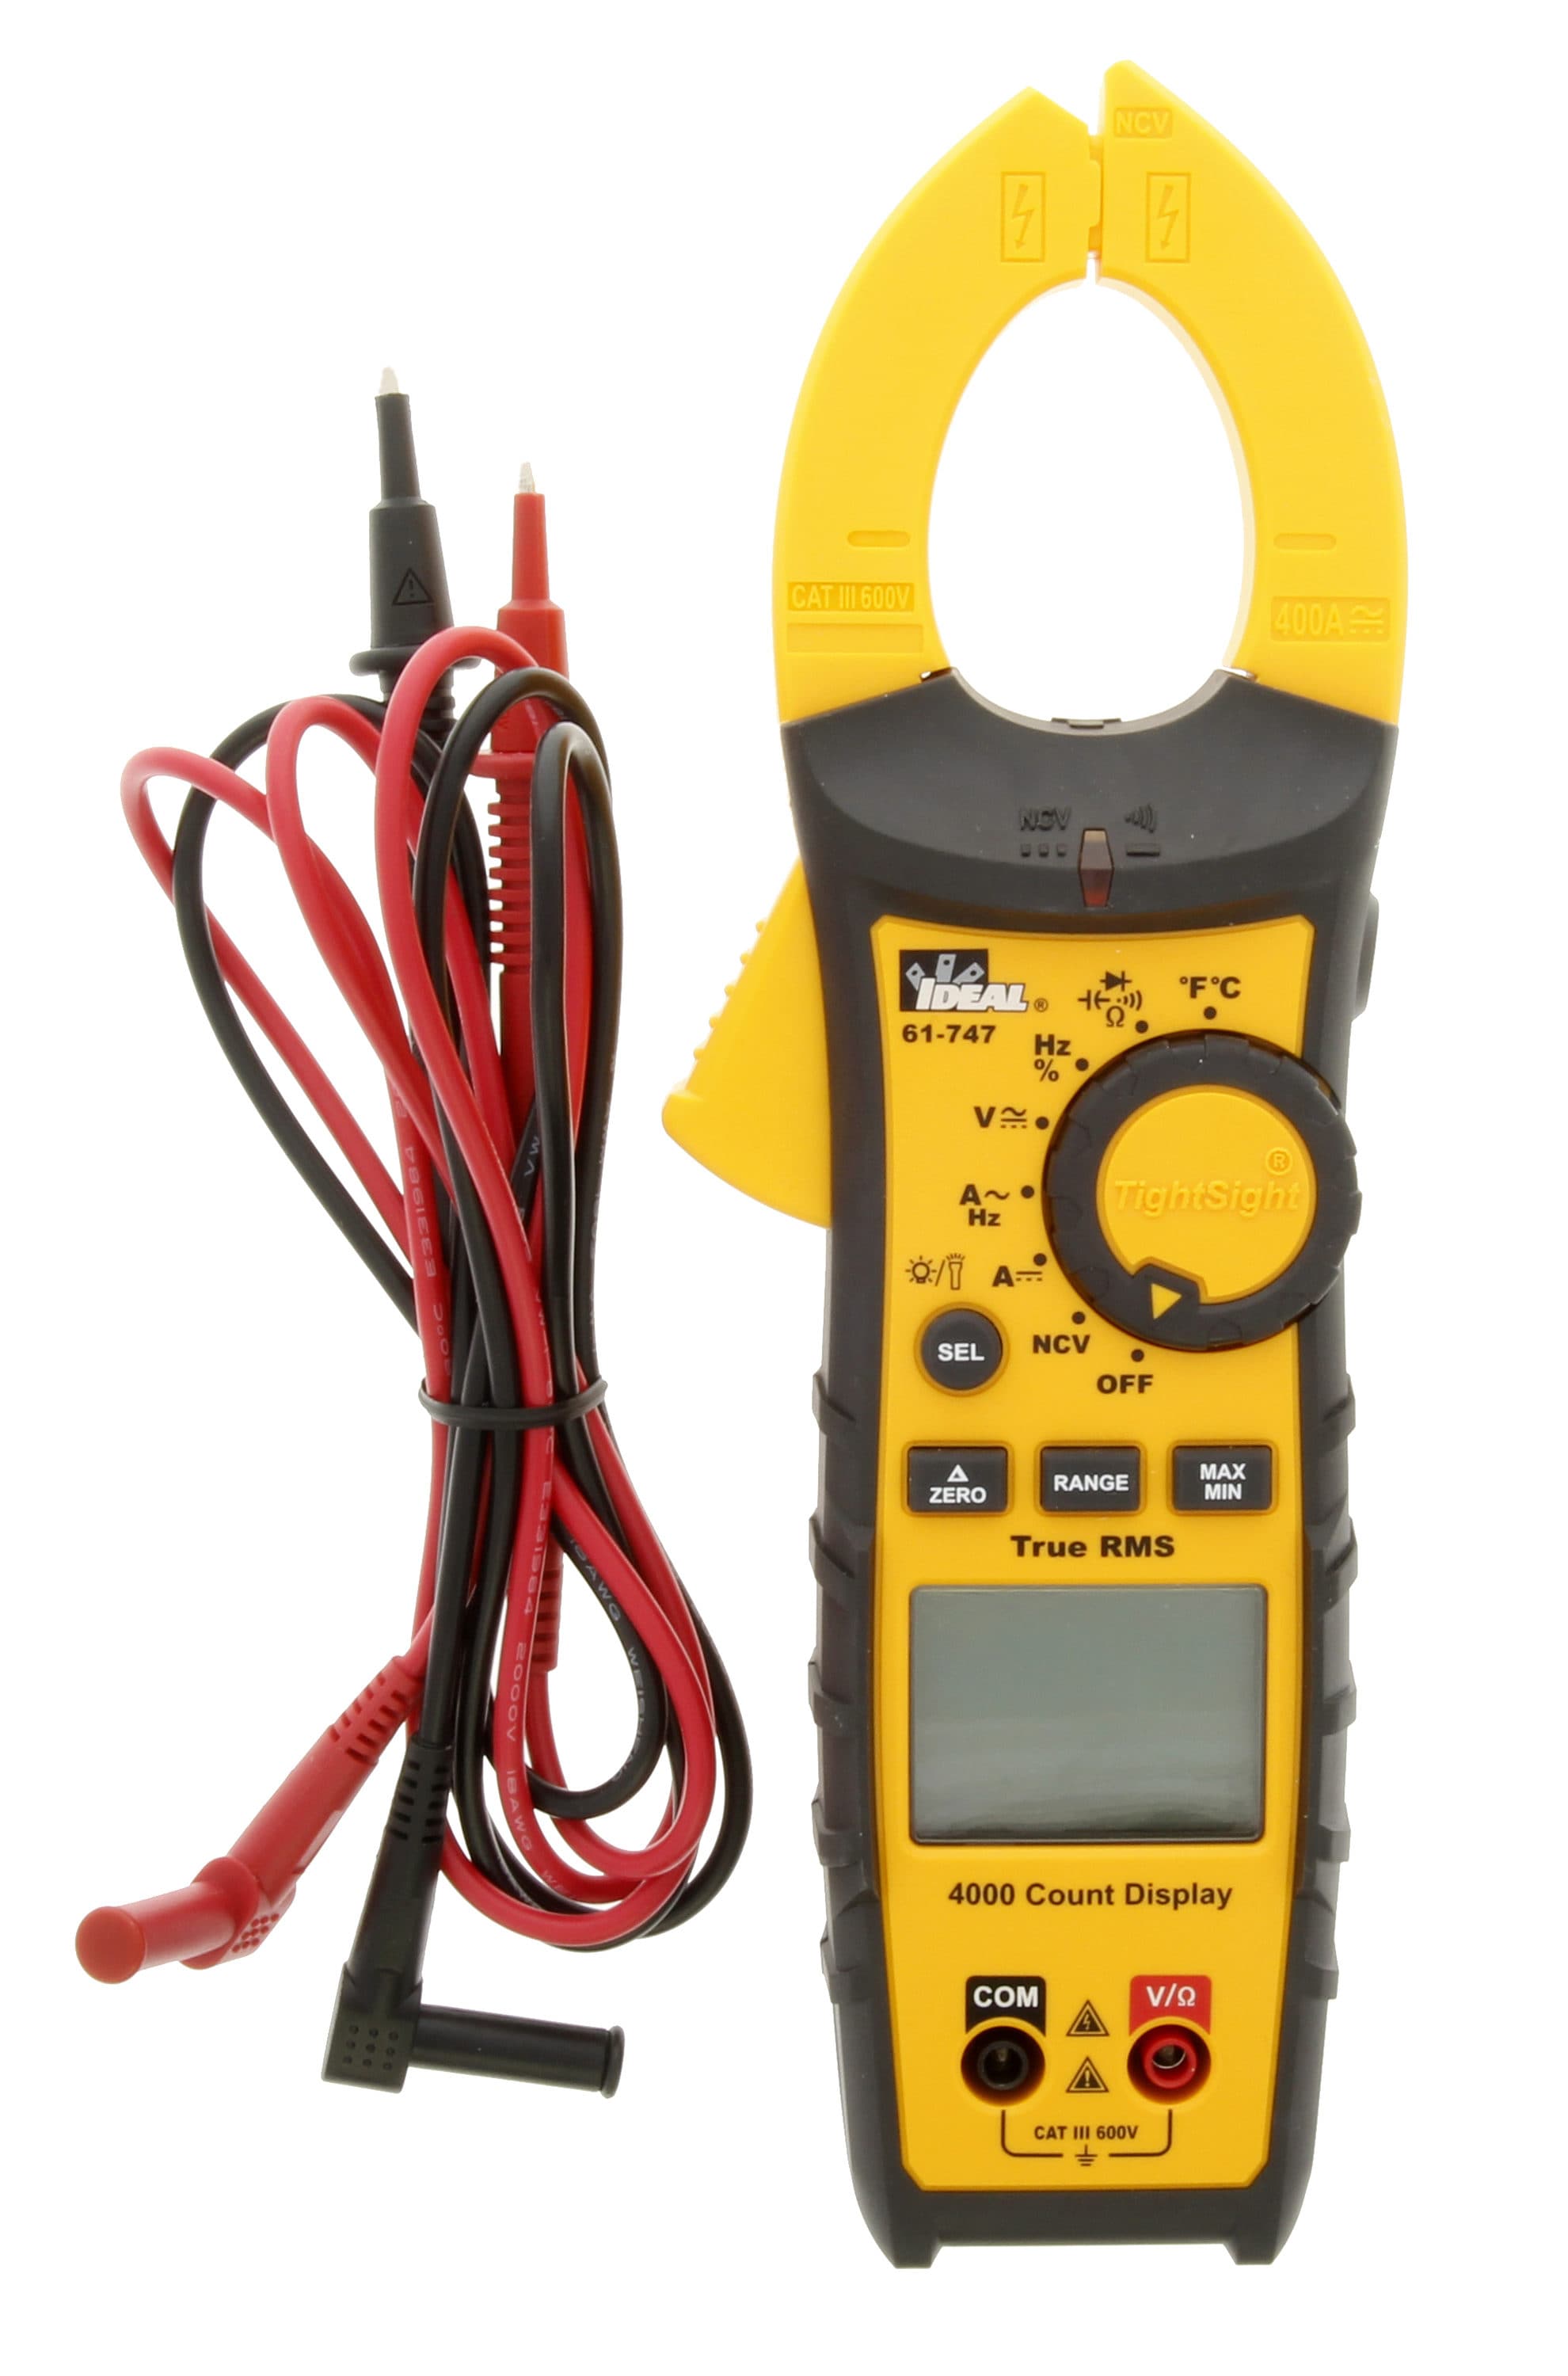 What is a Clamp Meter?